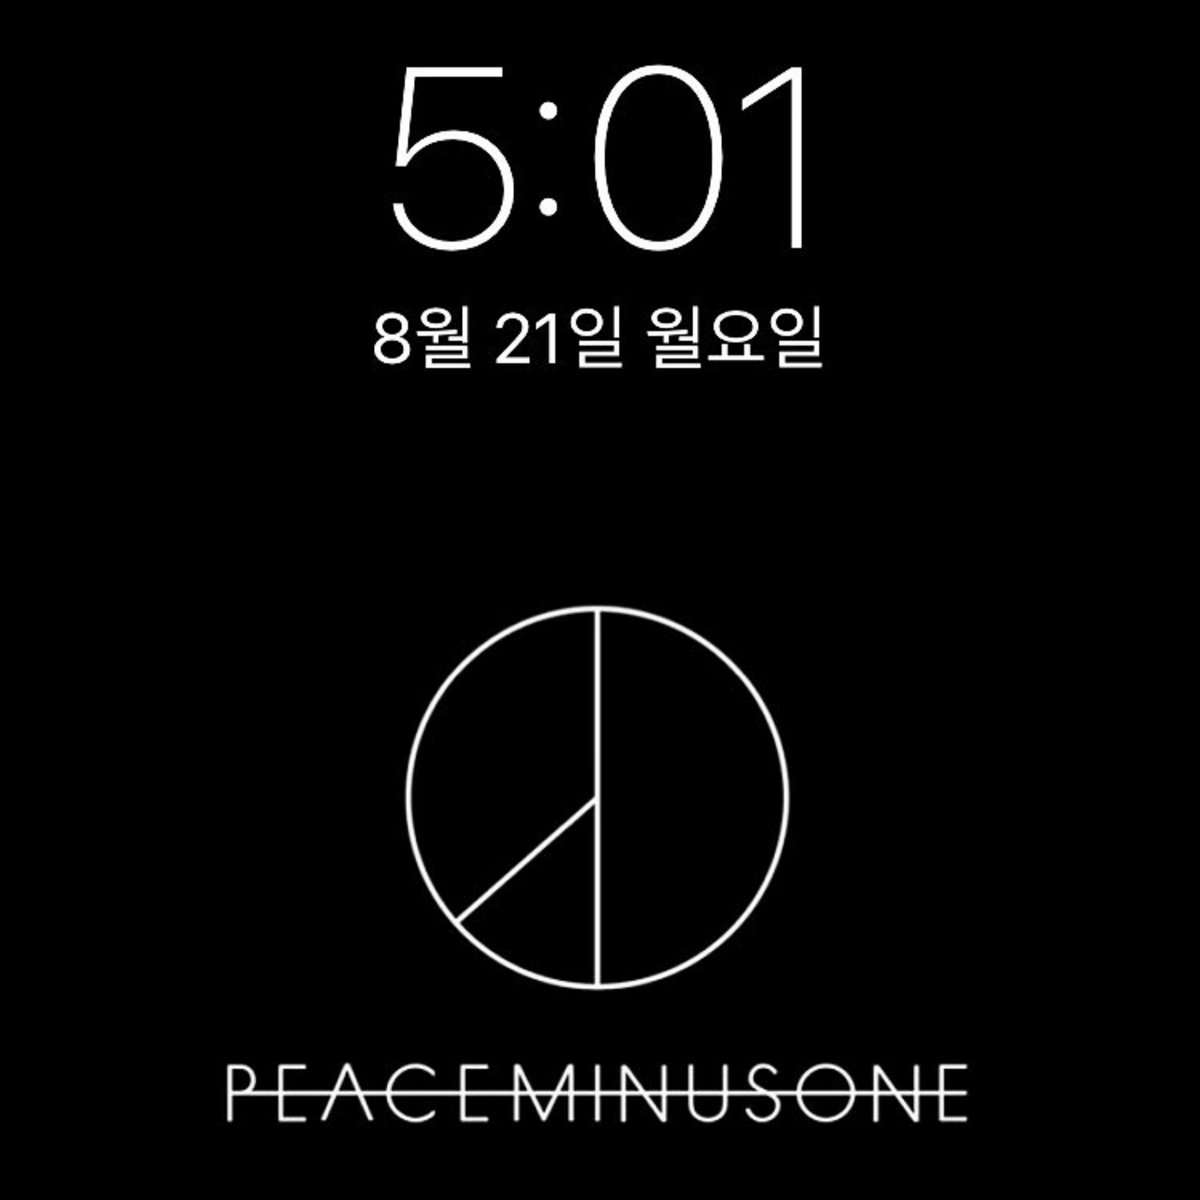 Peaceminusone Gd Wallpapers